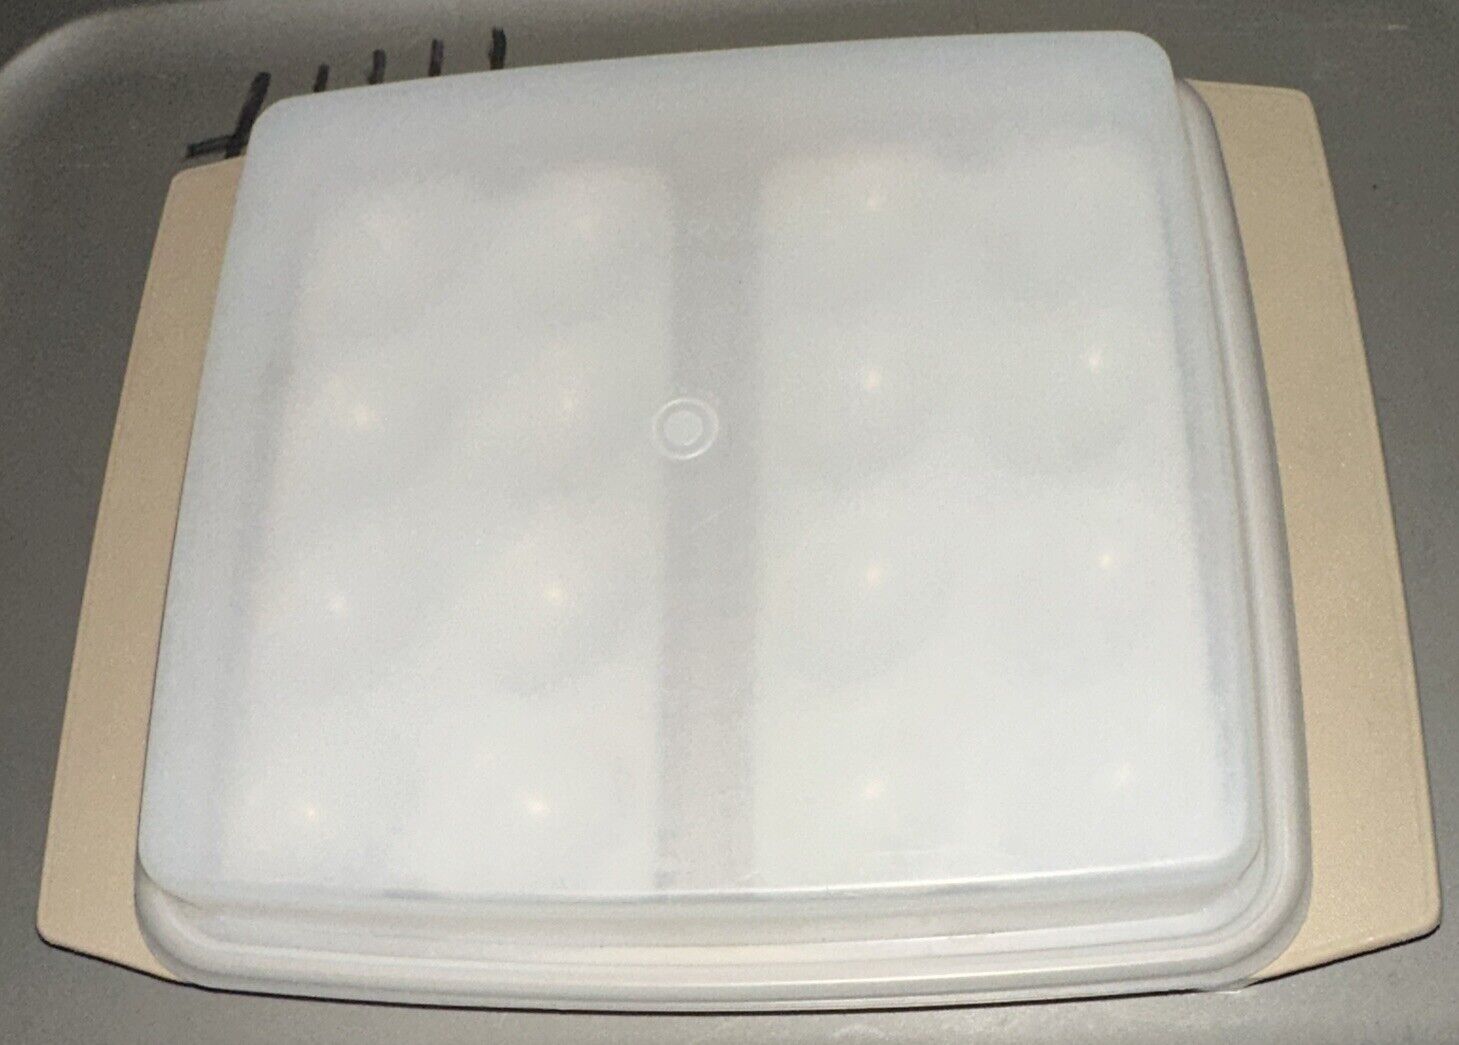 Vintage Tupperware 723-2 Square Deviled Egg Keeper Container with Lid